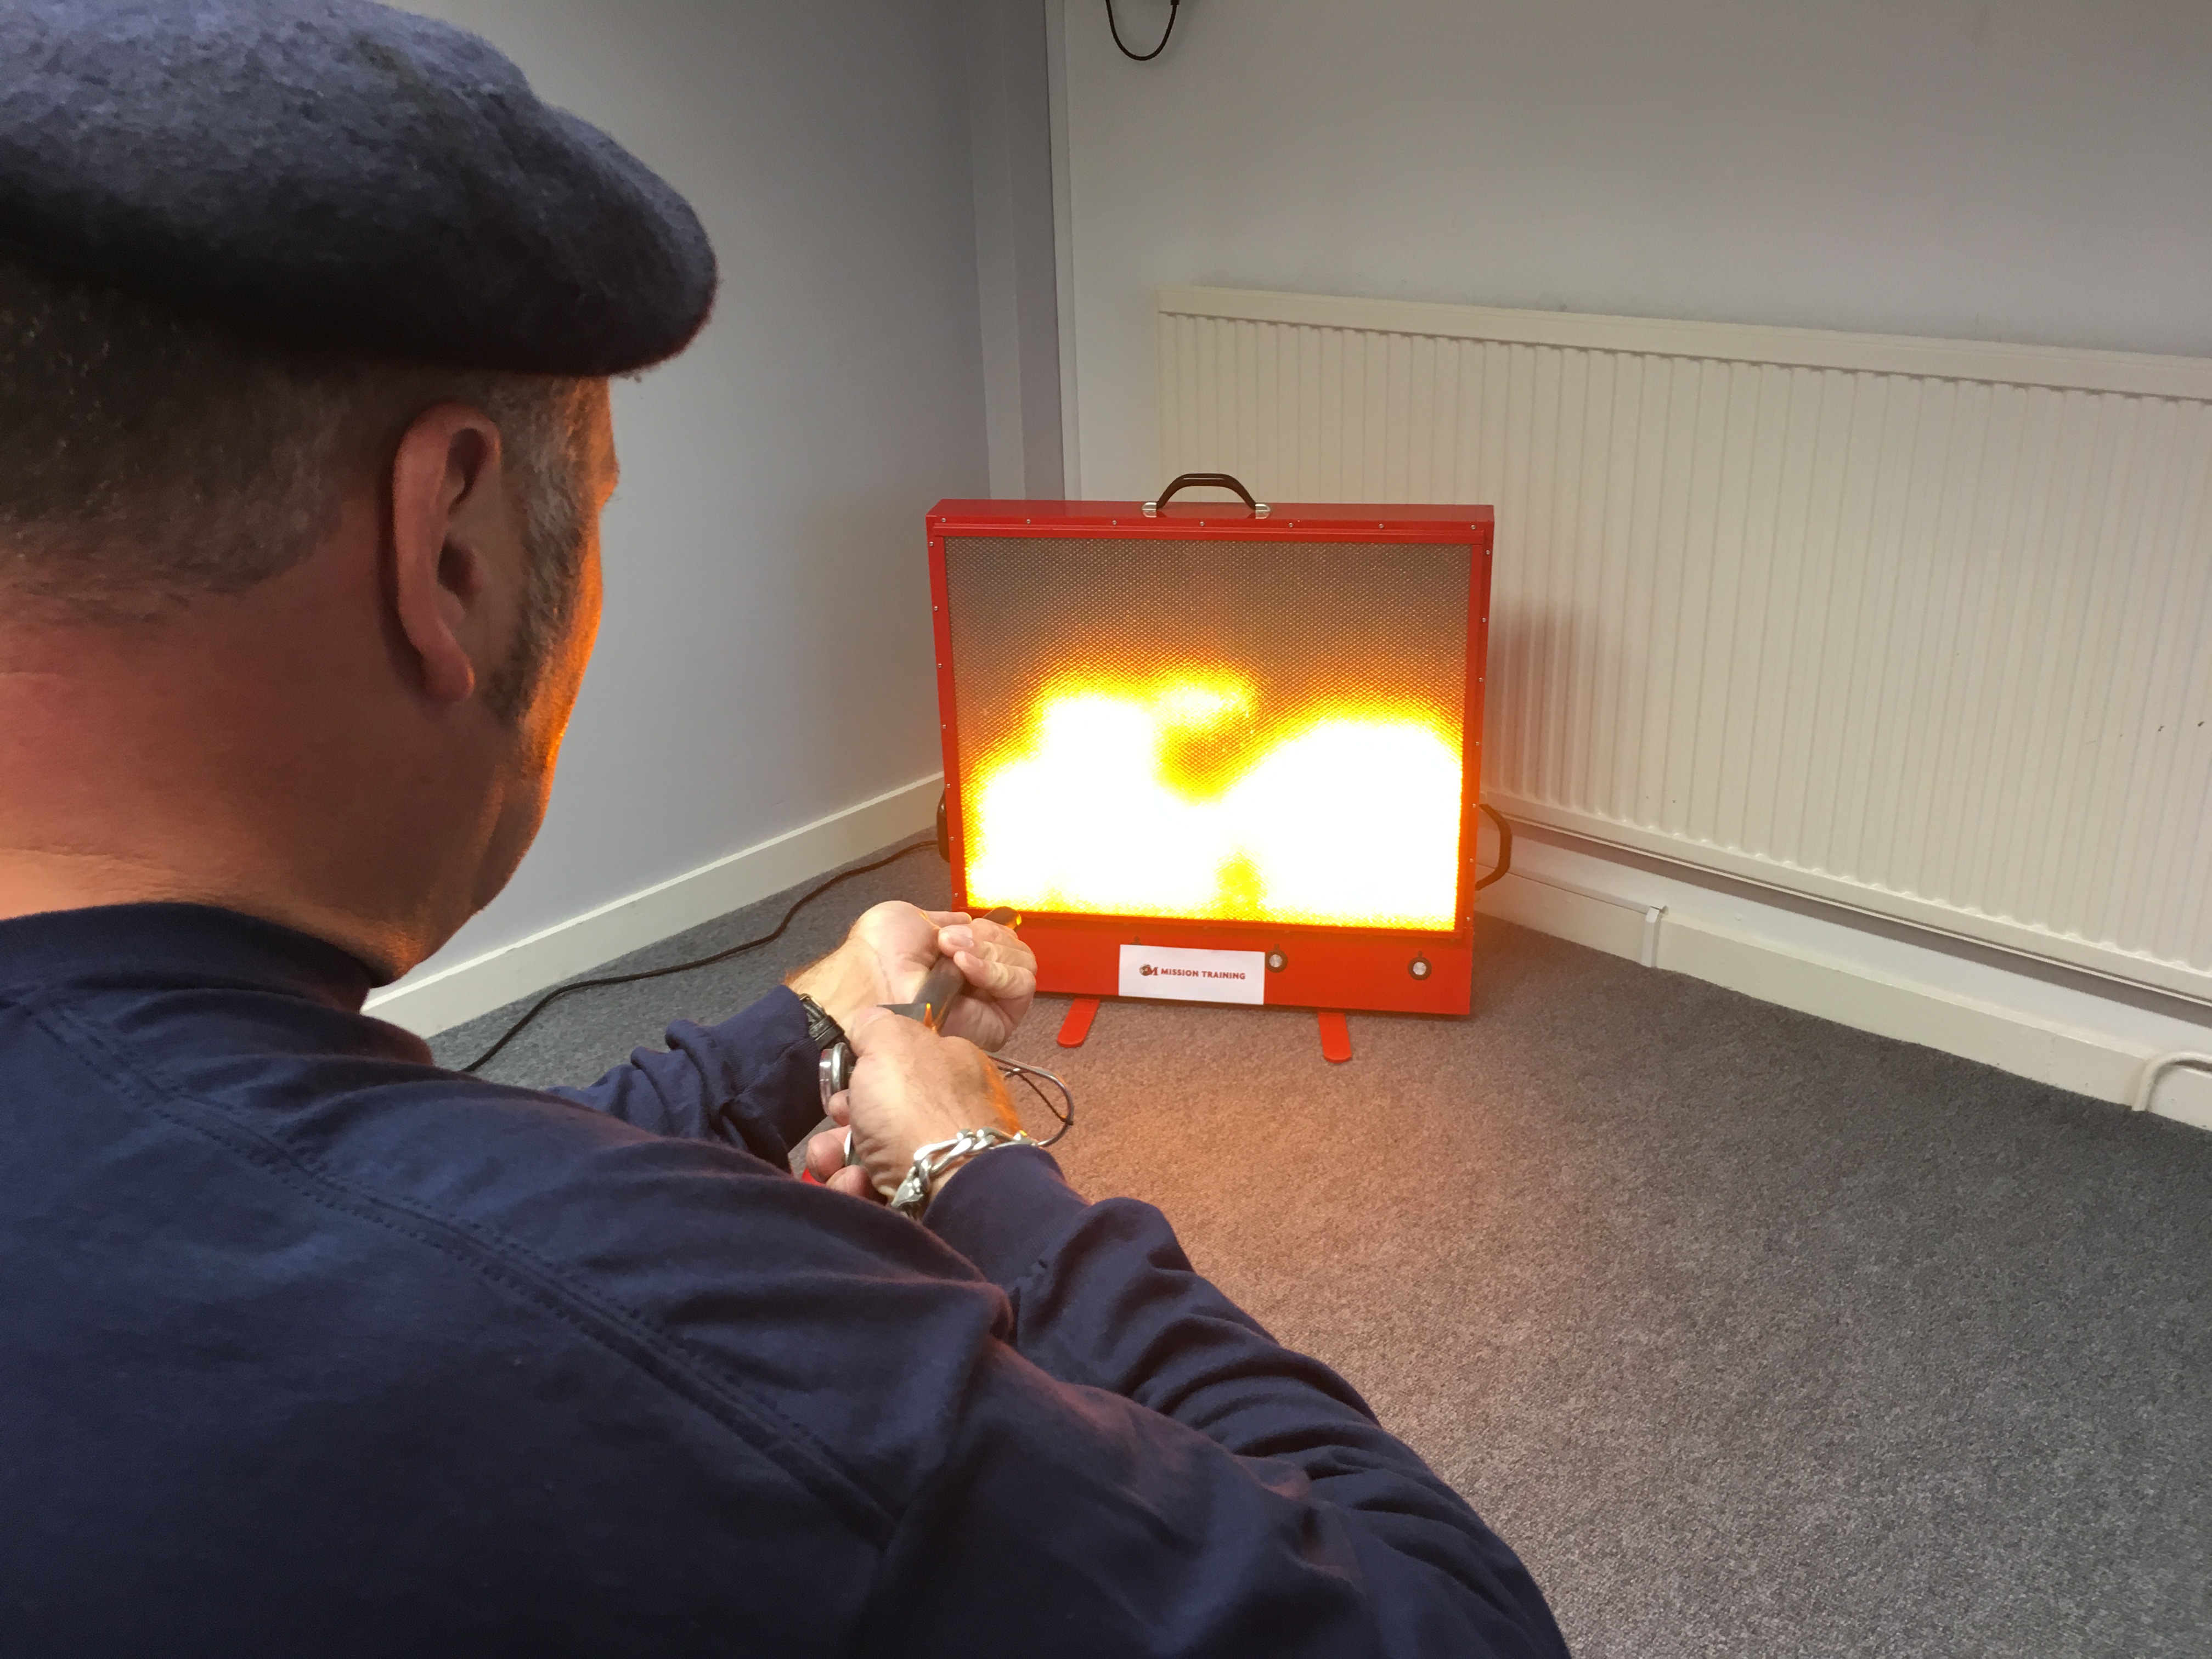 September 2016 - Maximus completes fire training on our Fire Extinguisher Simulator training